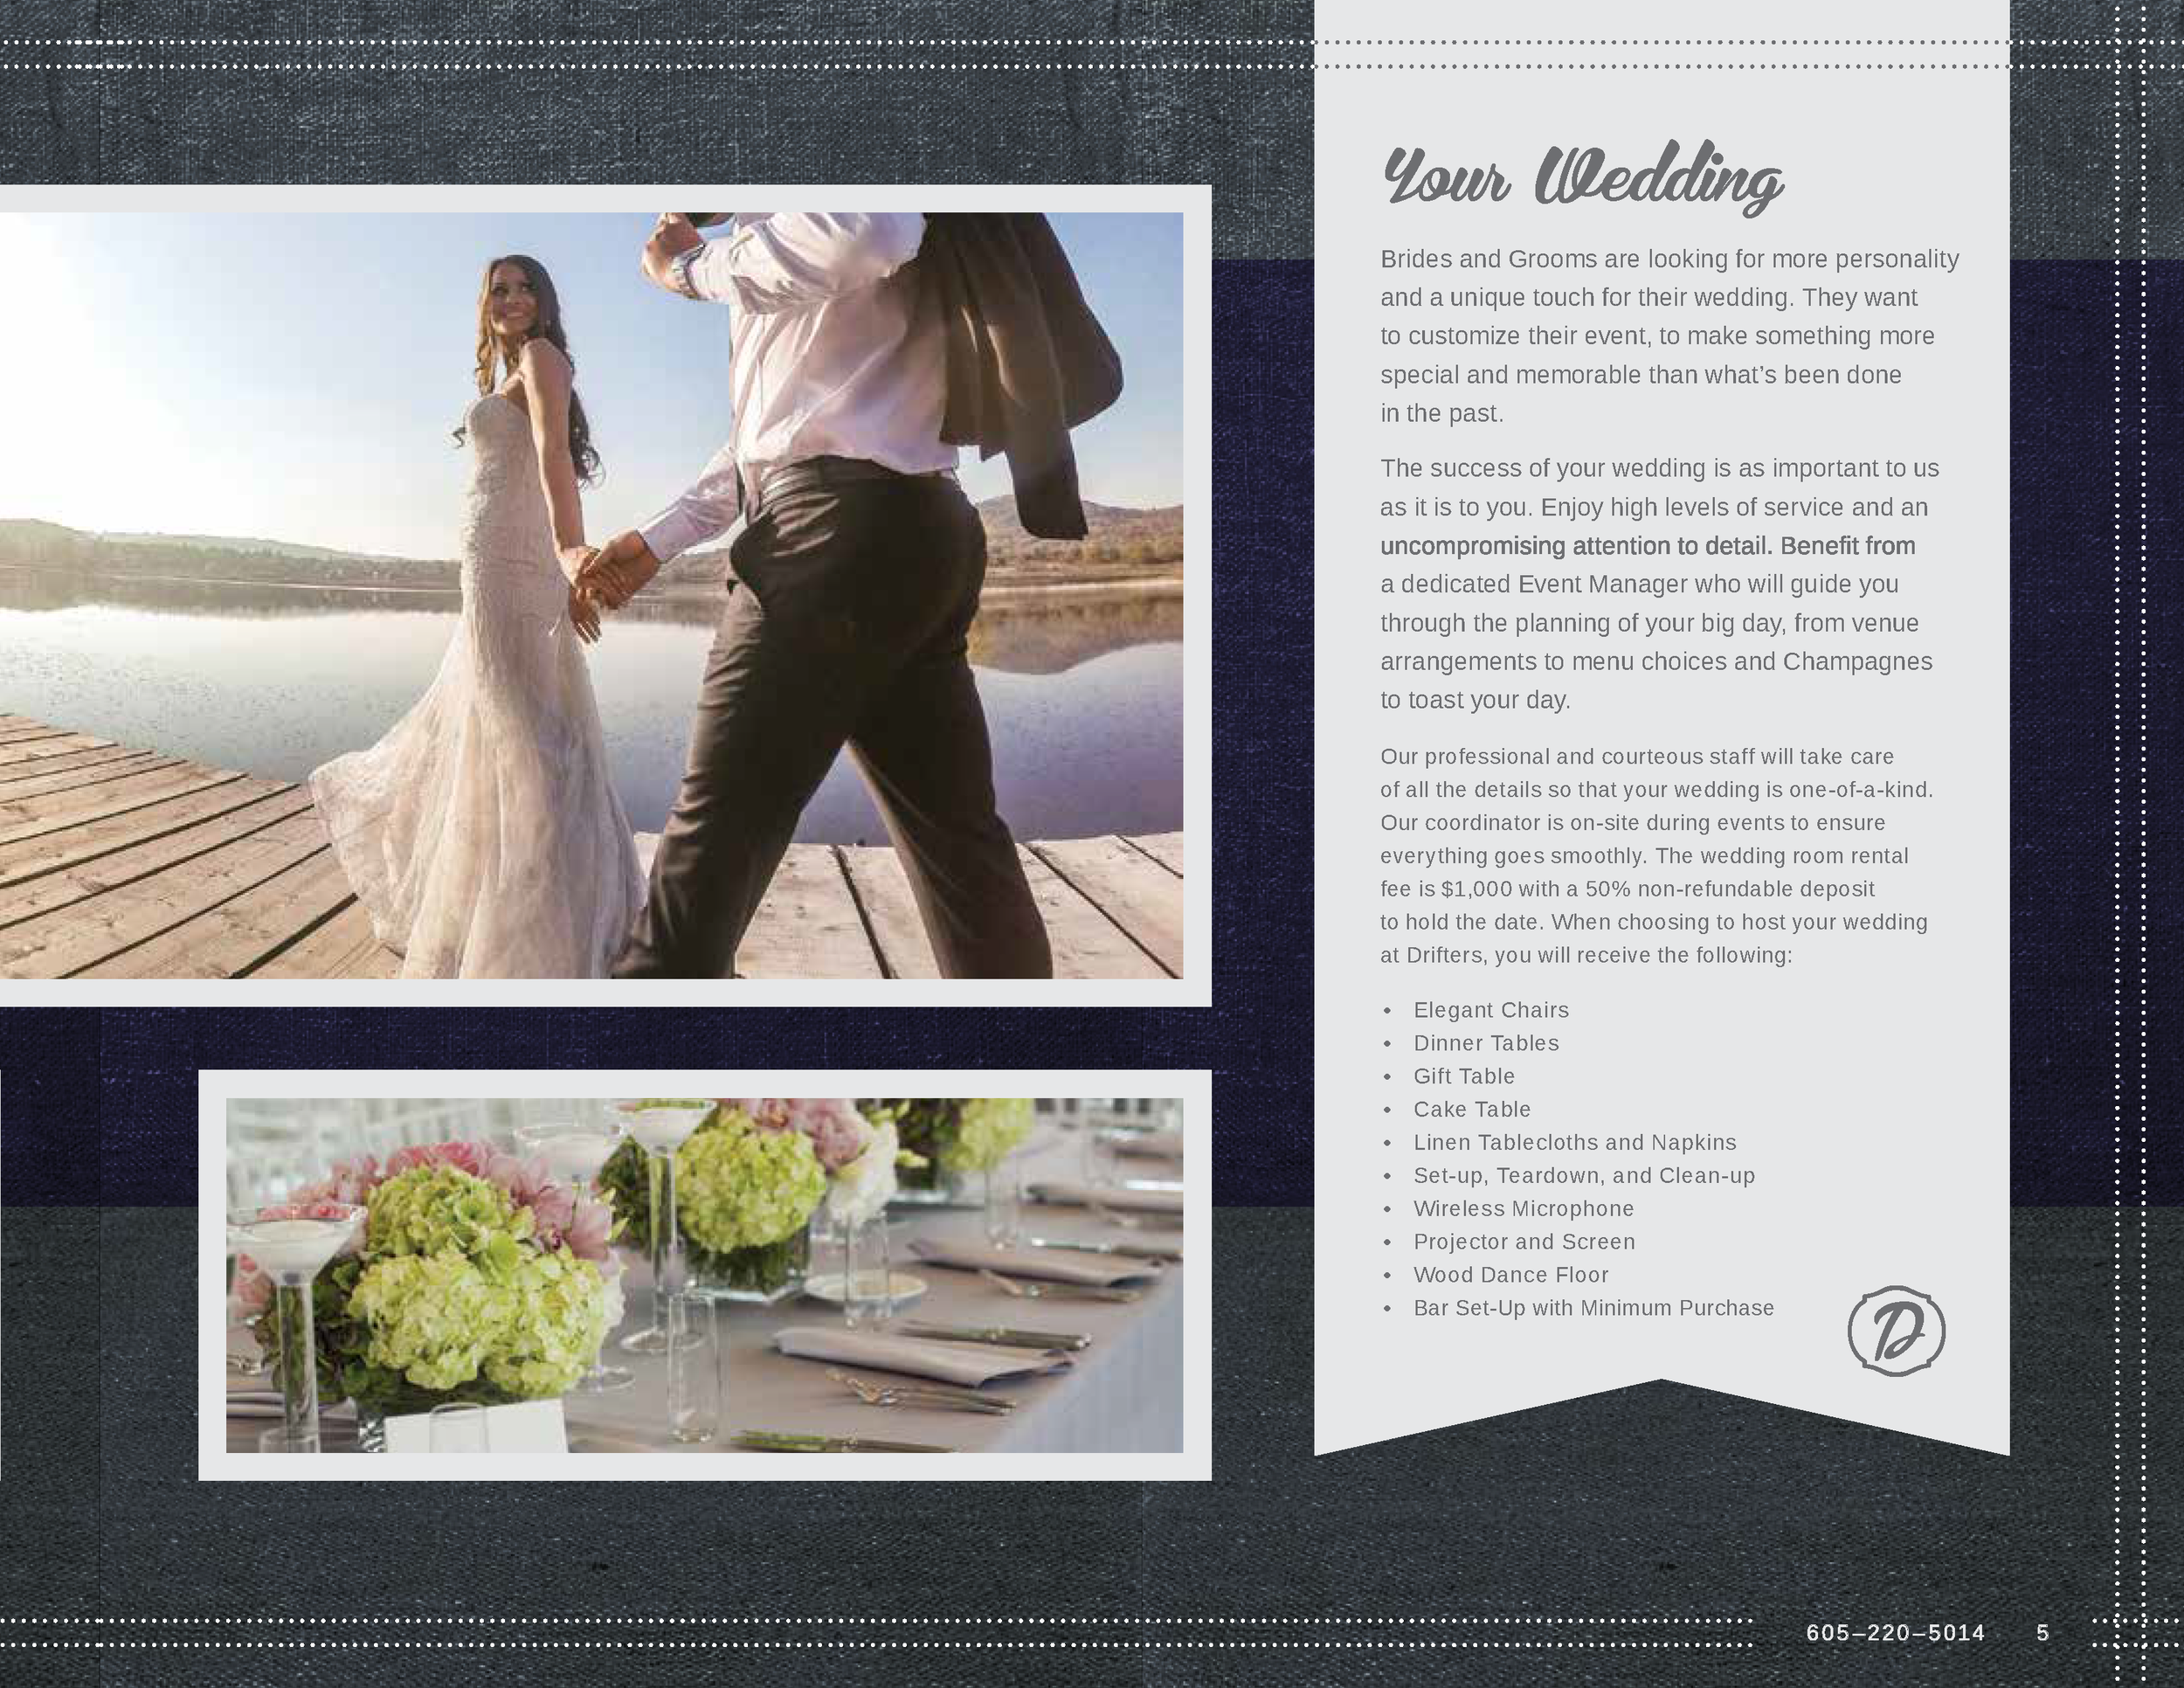 Drifters Wedding Brochure_Page_05.png